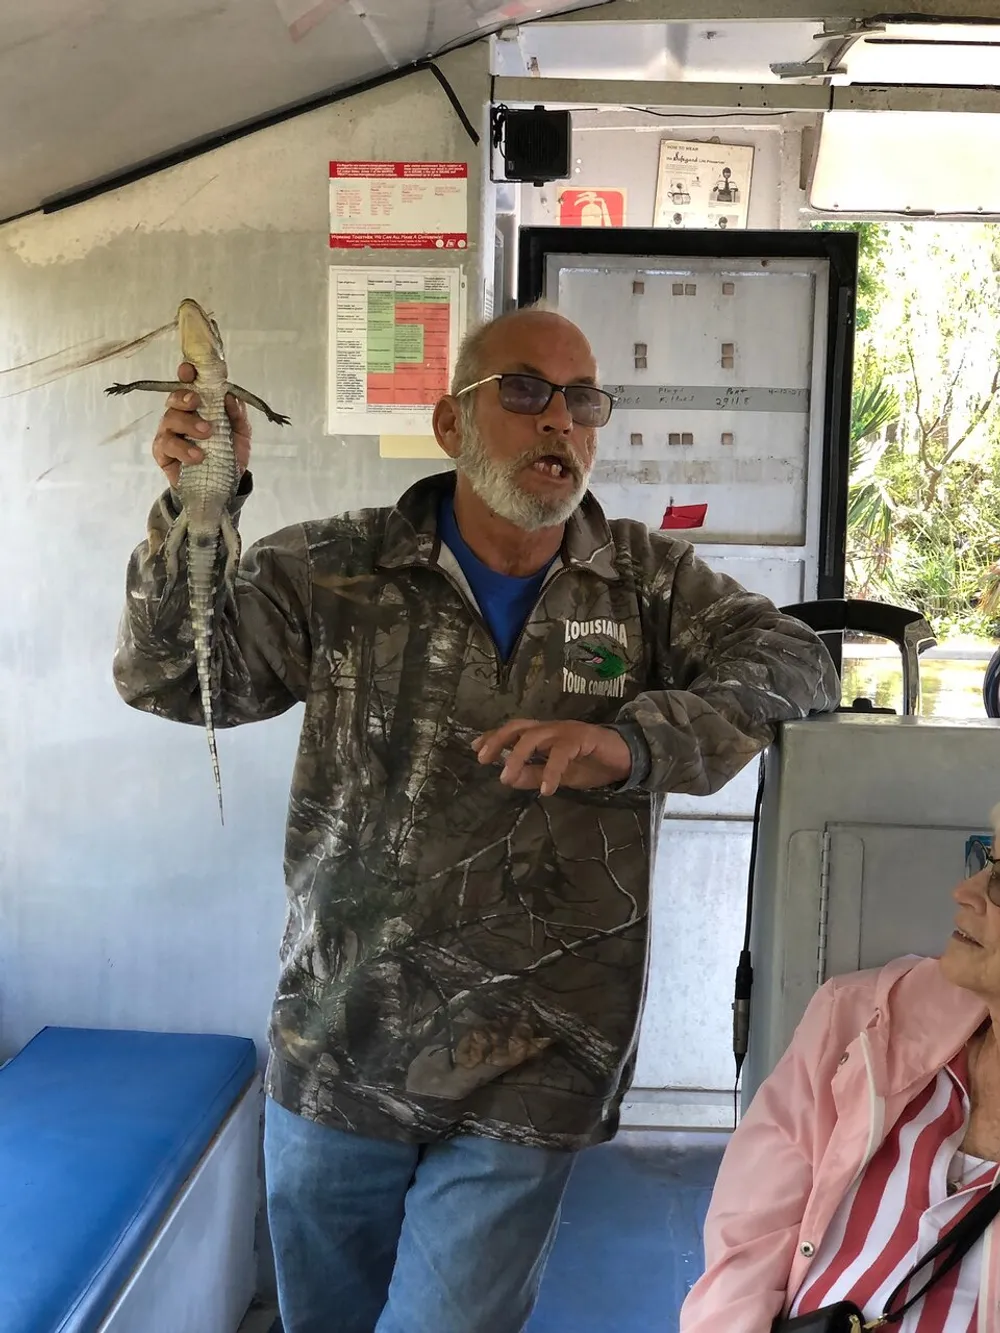 A man is holding a small alligator while giving a presentation on a boat as a passenger looks on